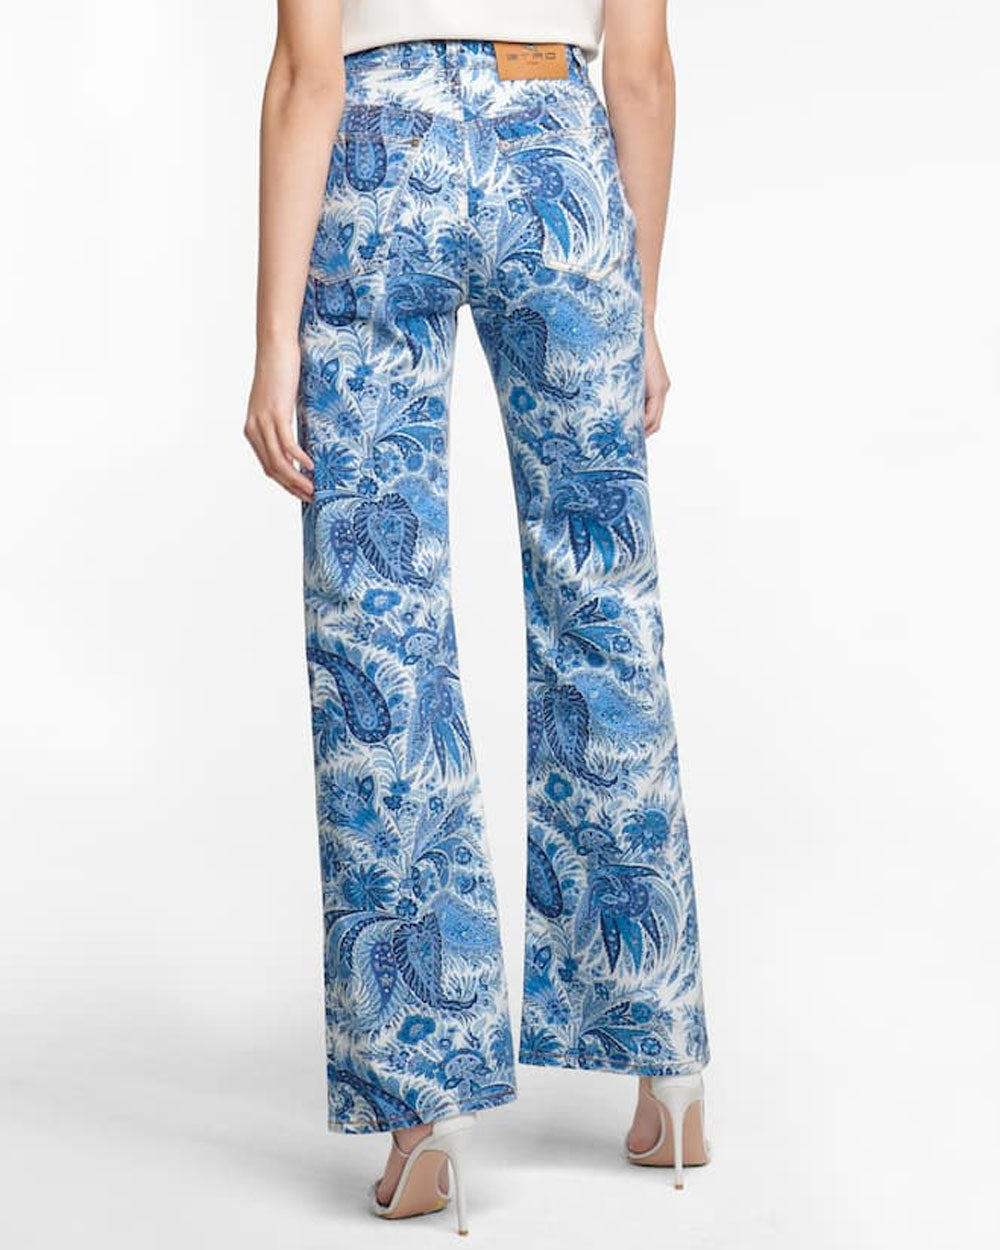 Blue Paisley High Rise Straight Jeans